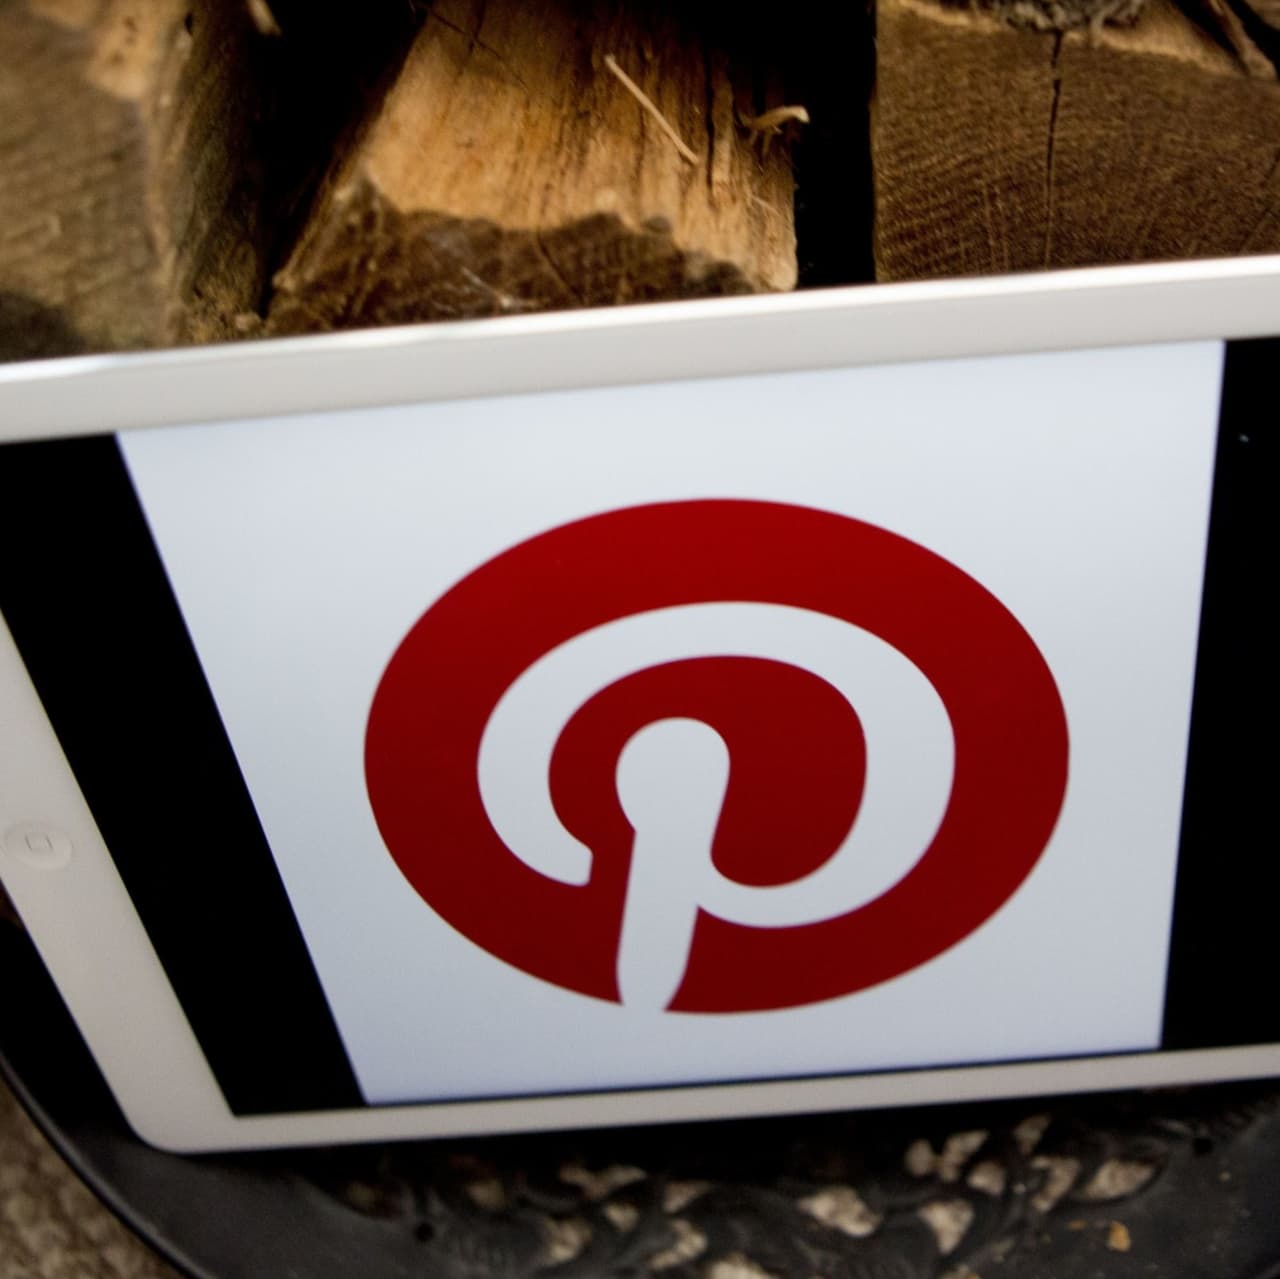 Pinterest stock plunges after saying U.S. users are logging off ...